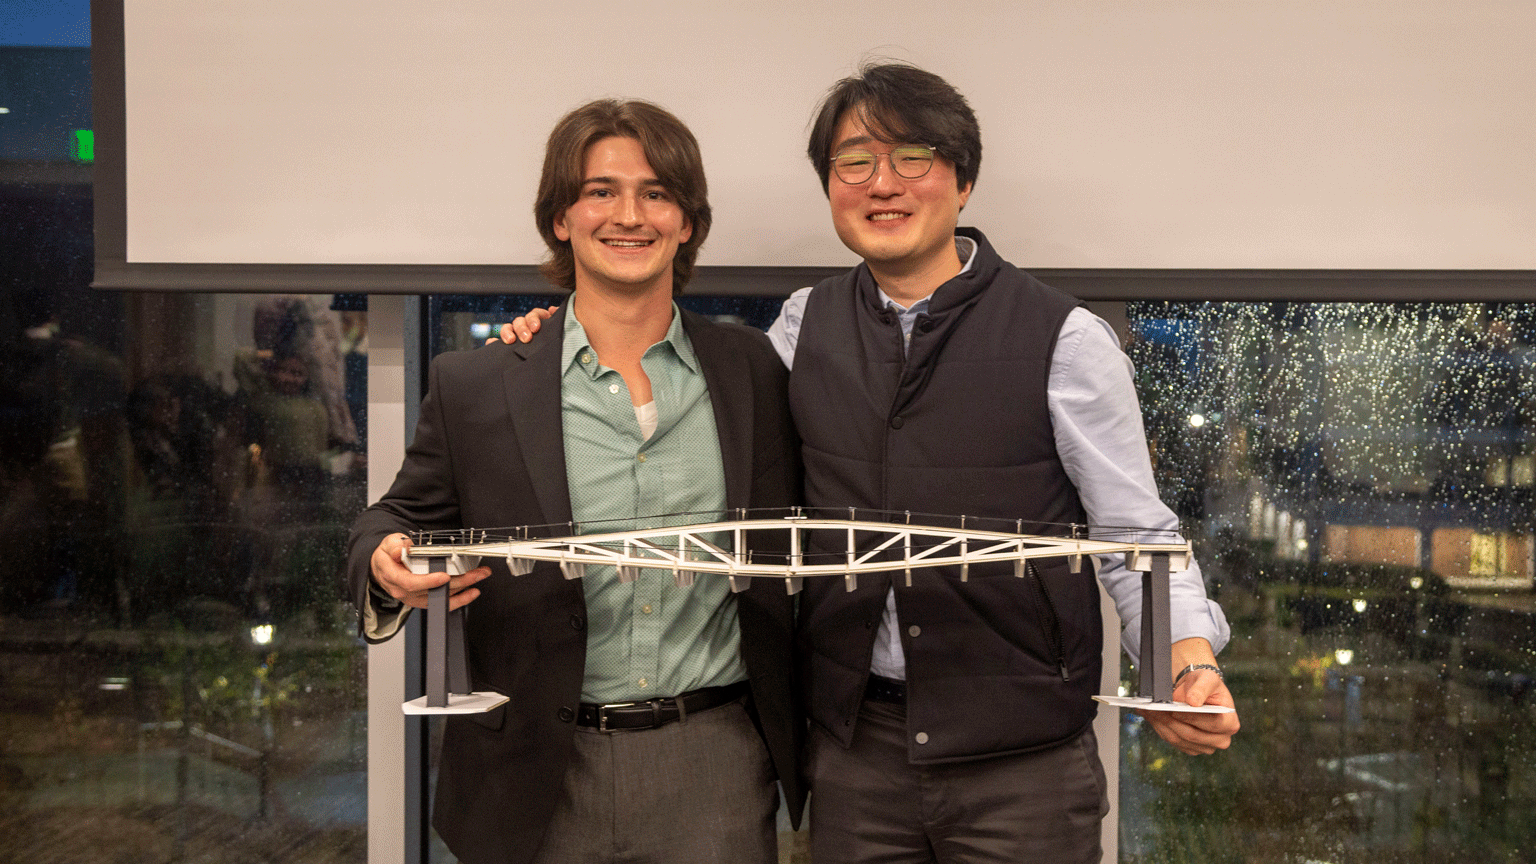 Isaac Wasson and Charles Kim pose with the model of their winning bridge design.